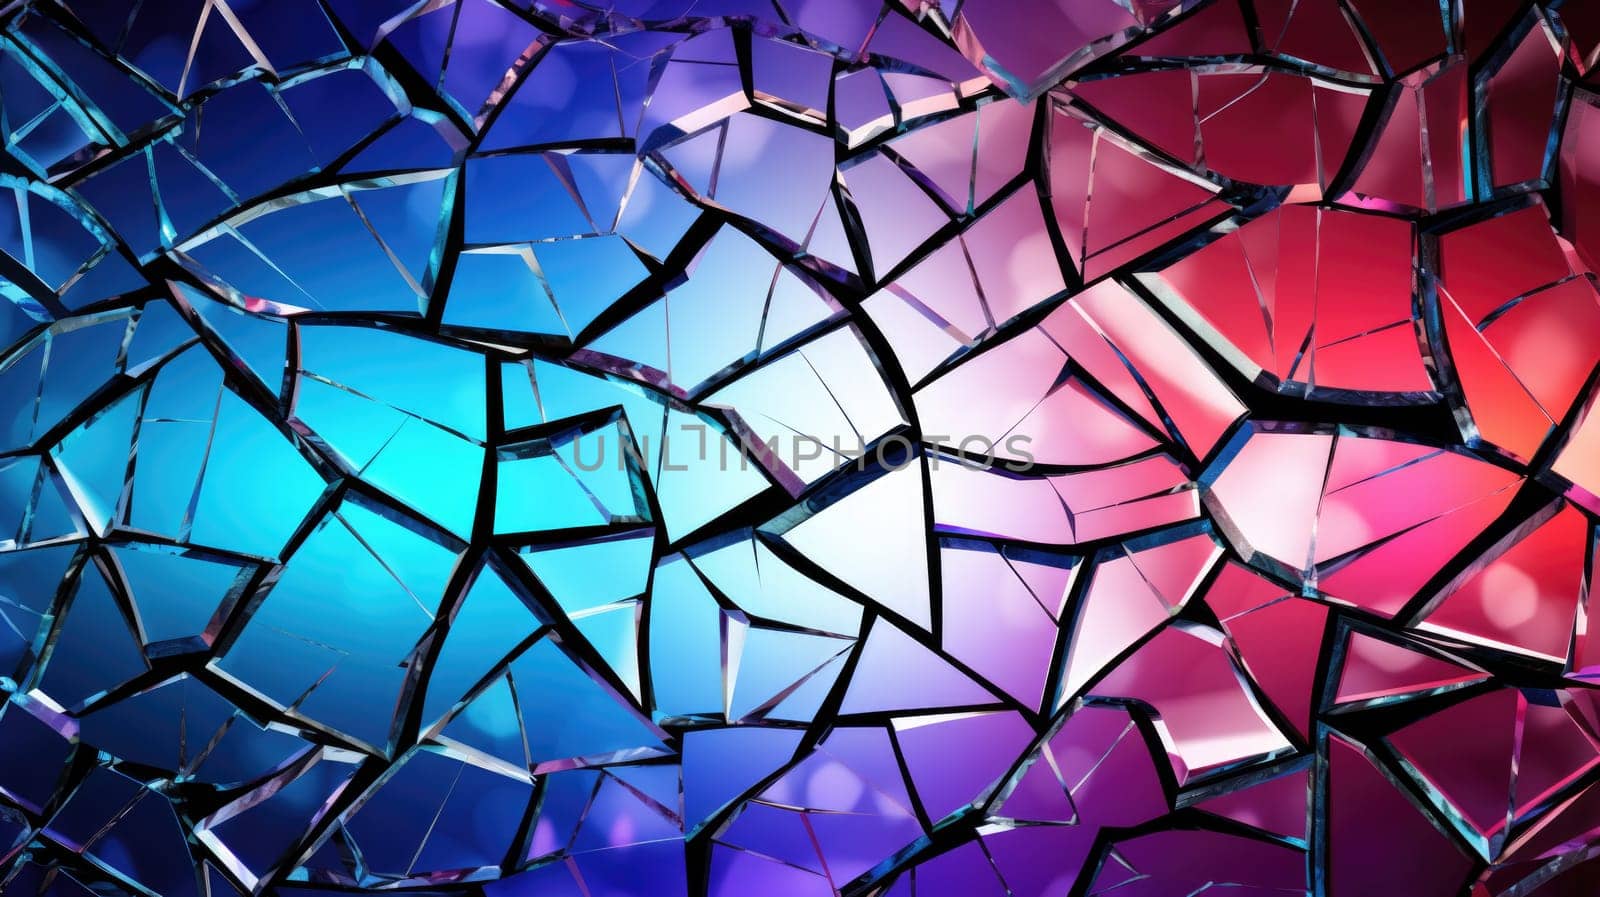 Colourful broken glass surface by palinchak